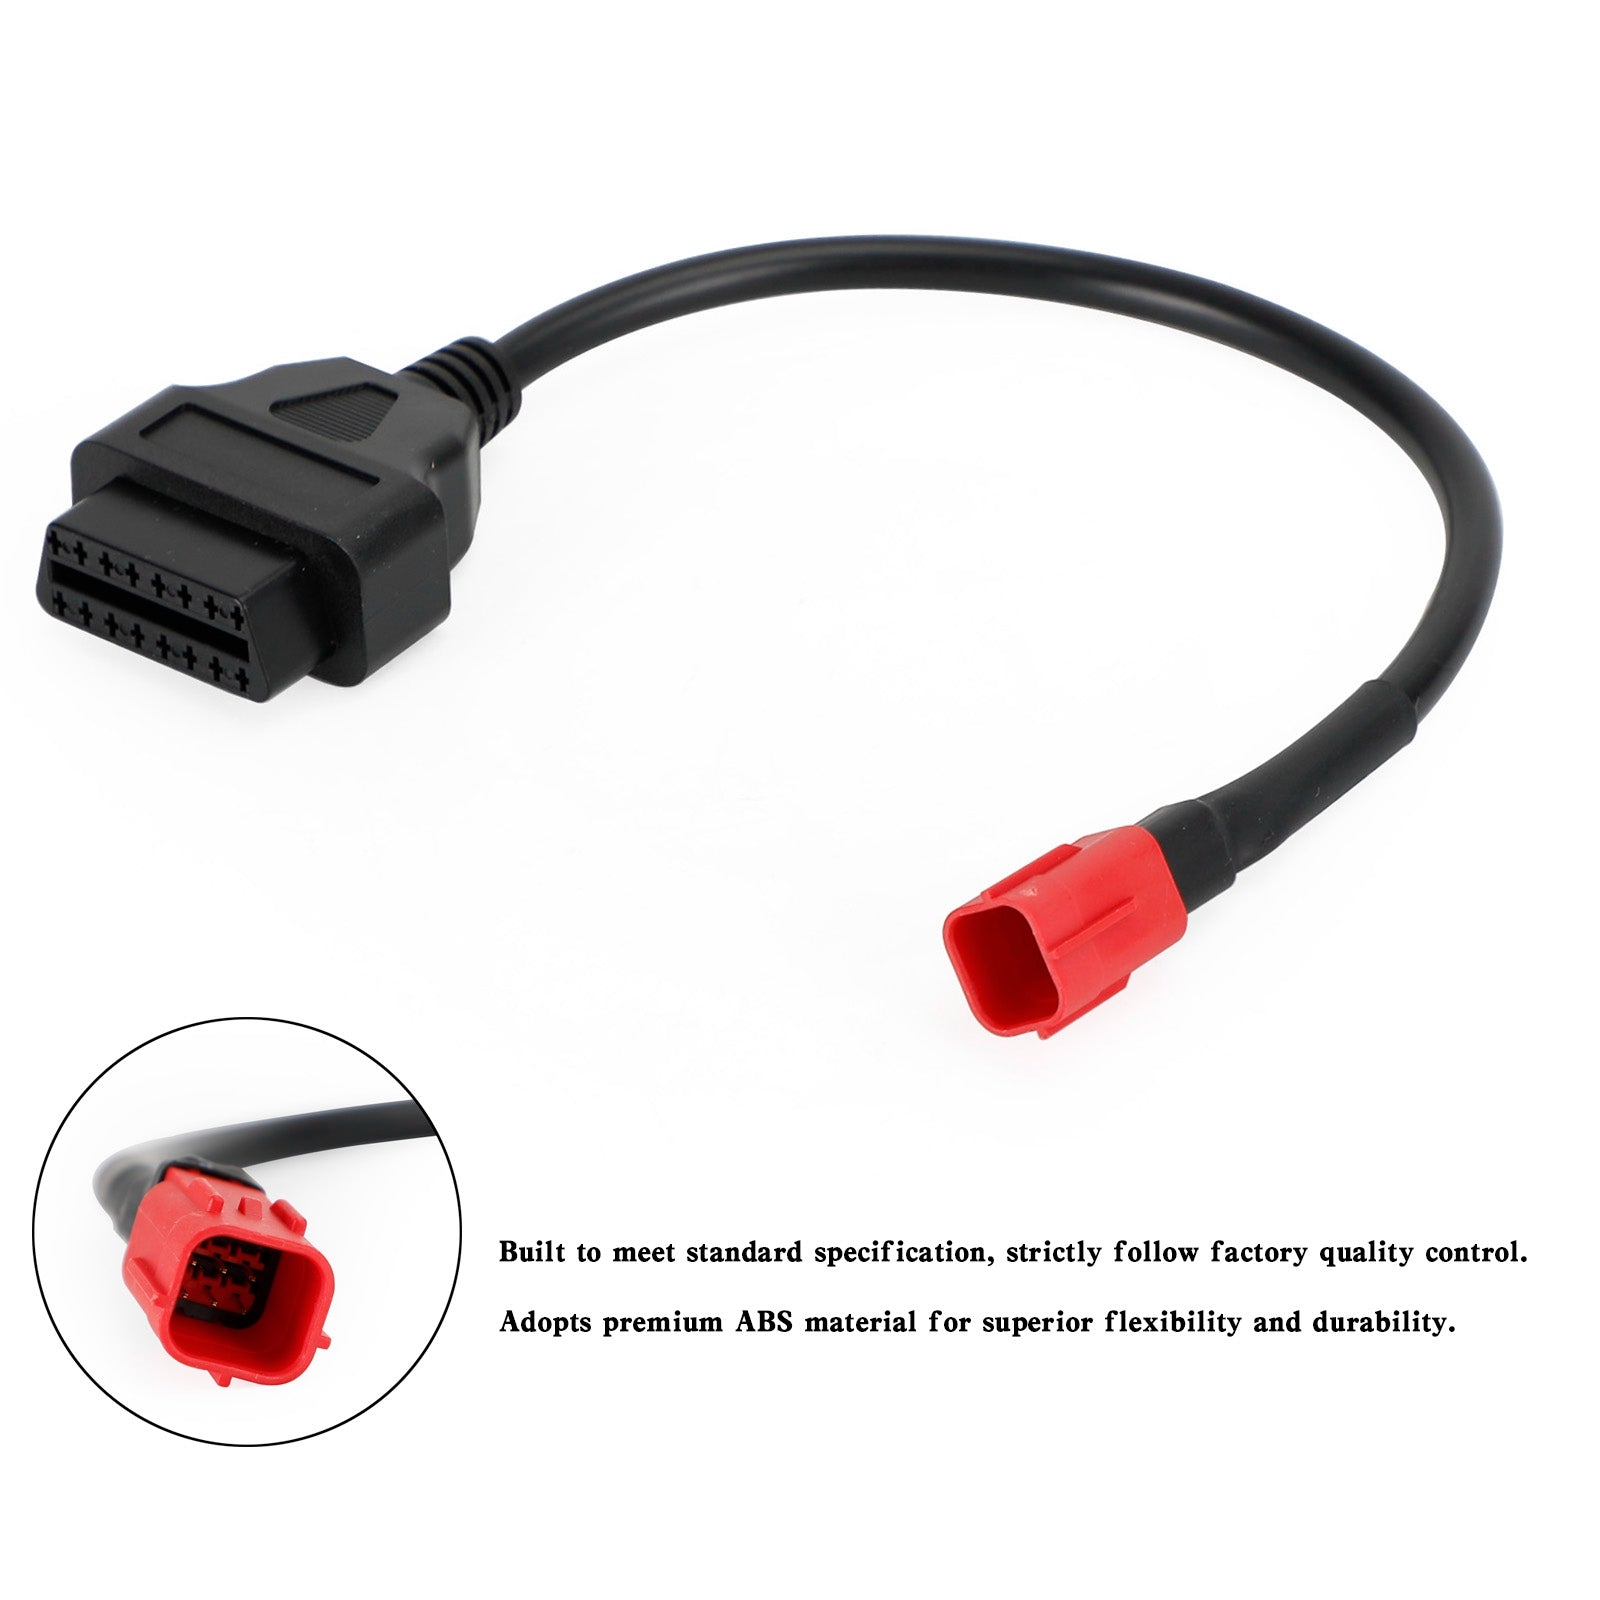 Honda 6pin OBD2 diagnostic connector cable for Honda motorcycle